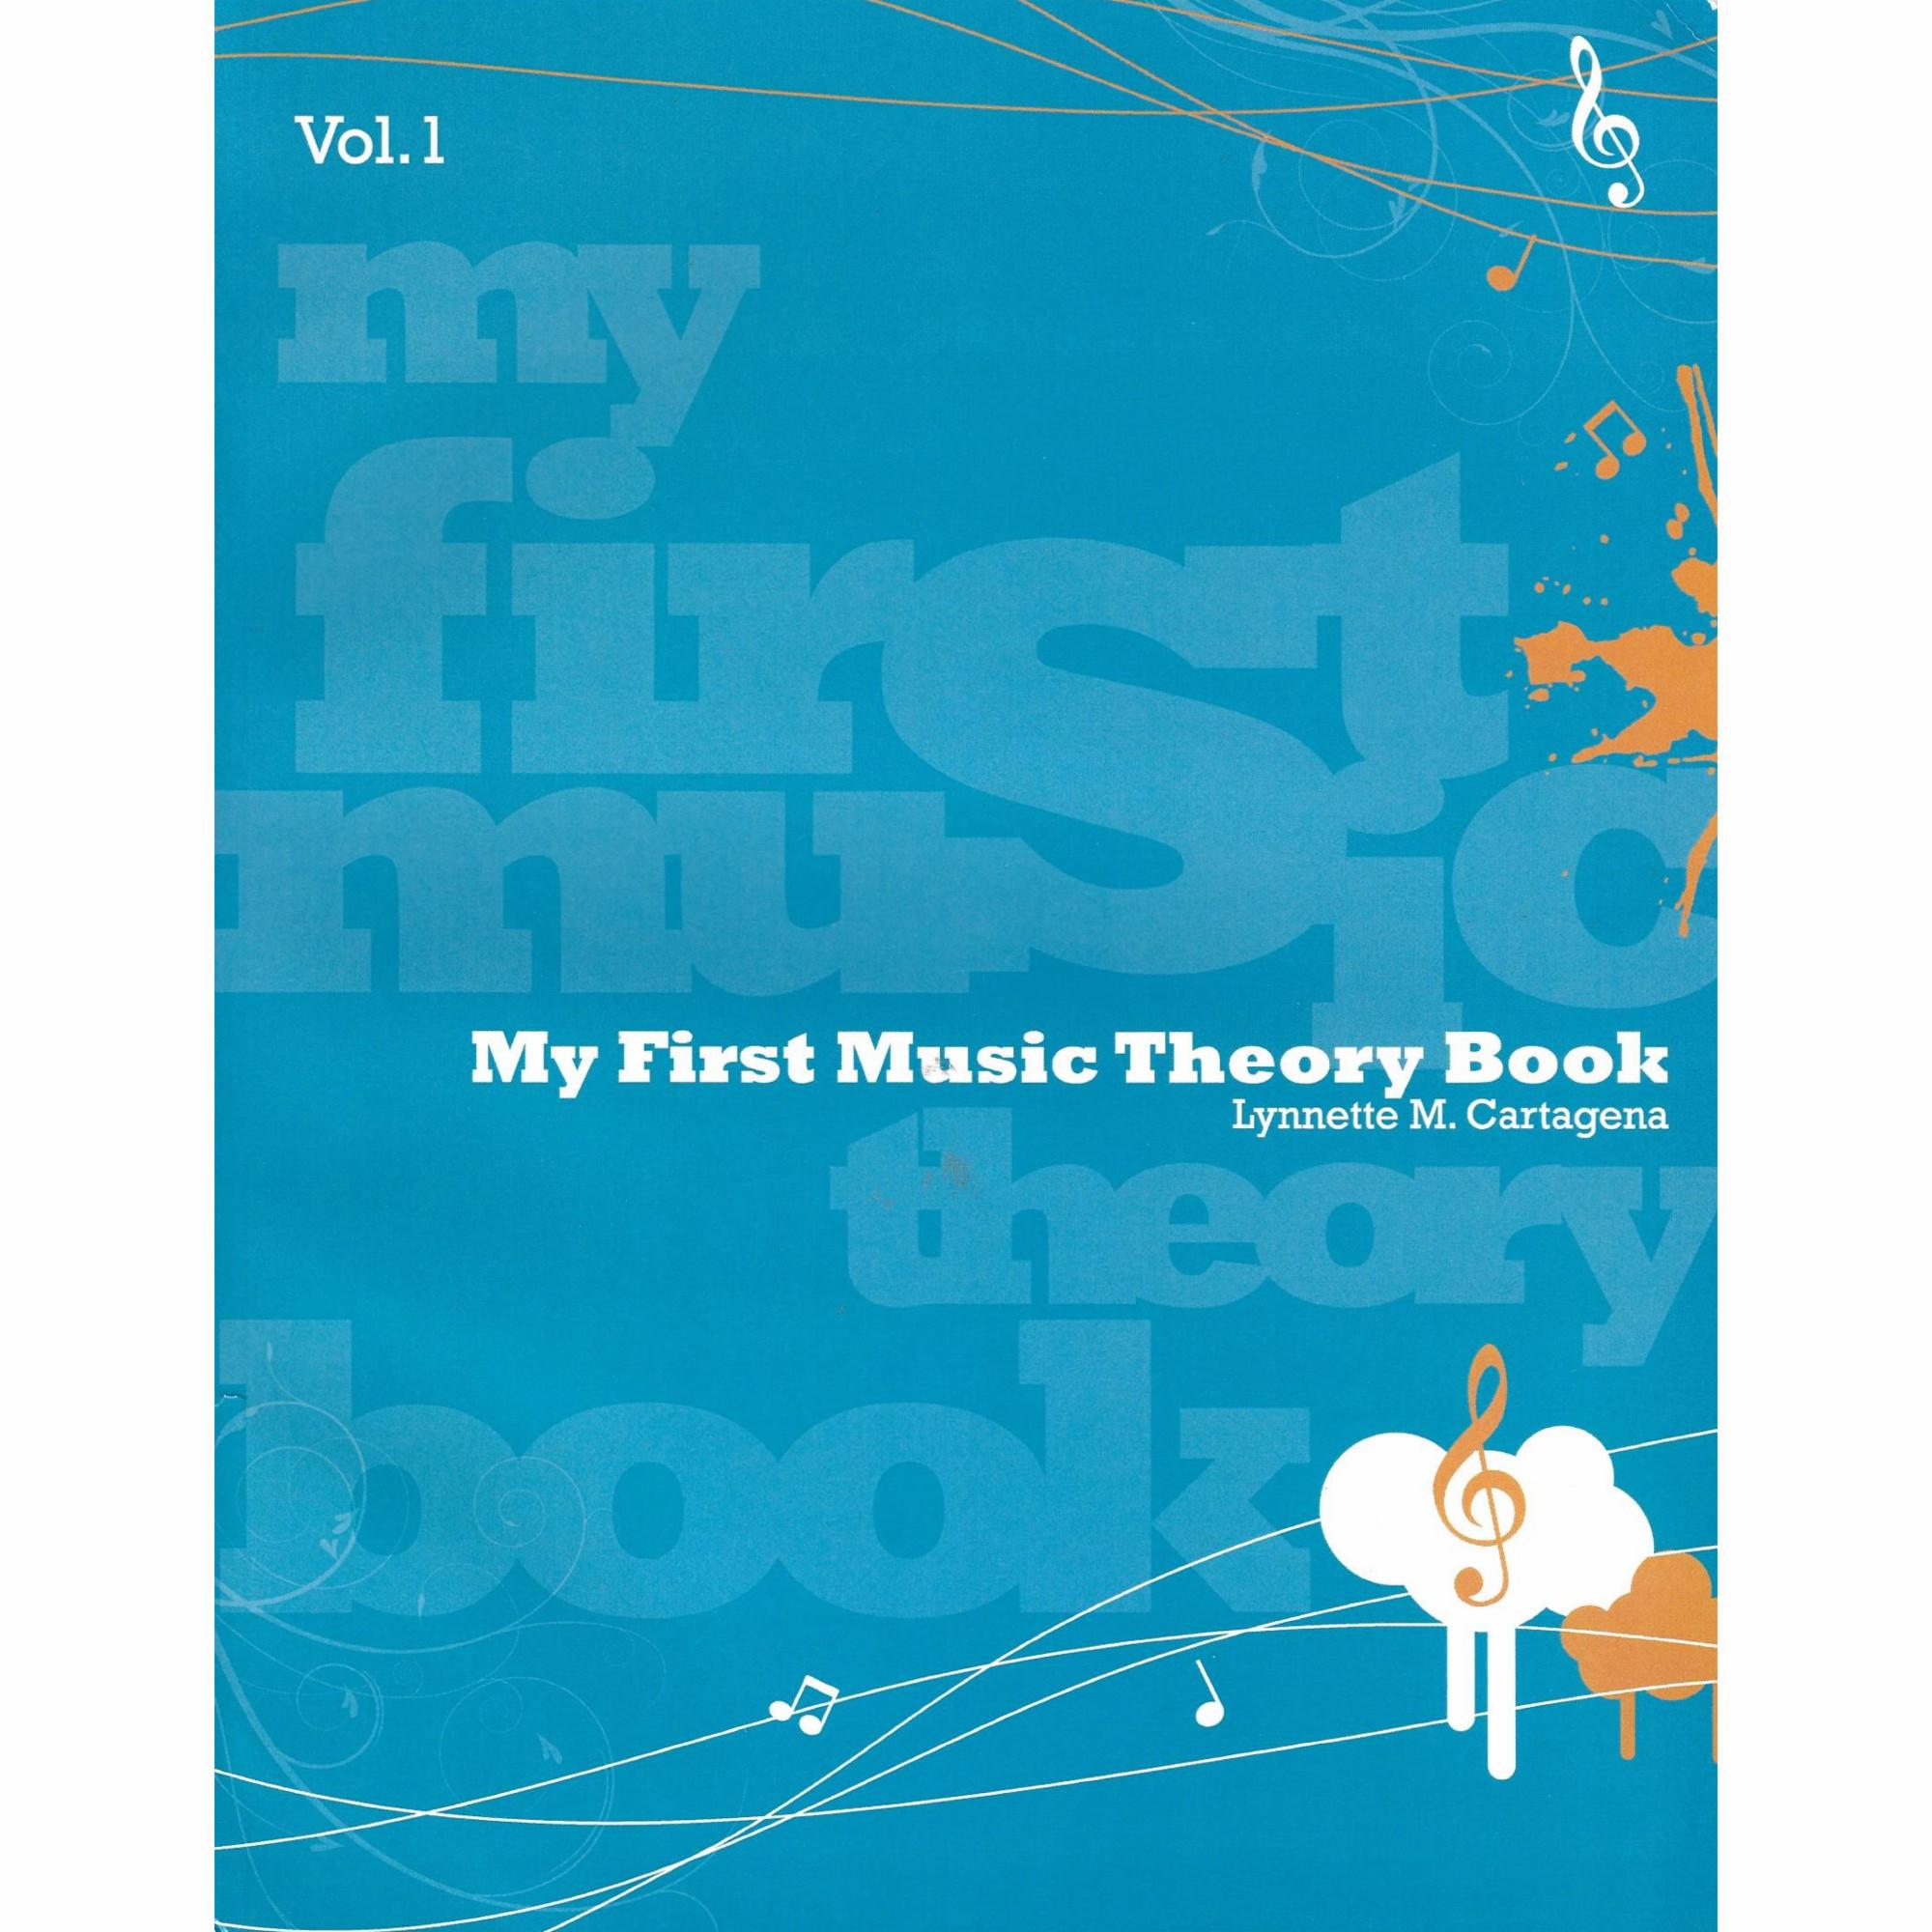 My First Music Theory Book, Vol. 1